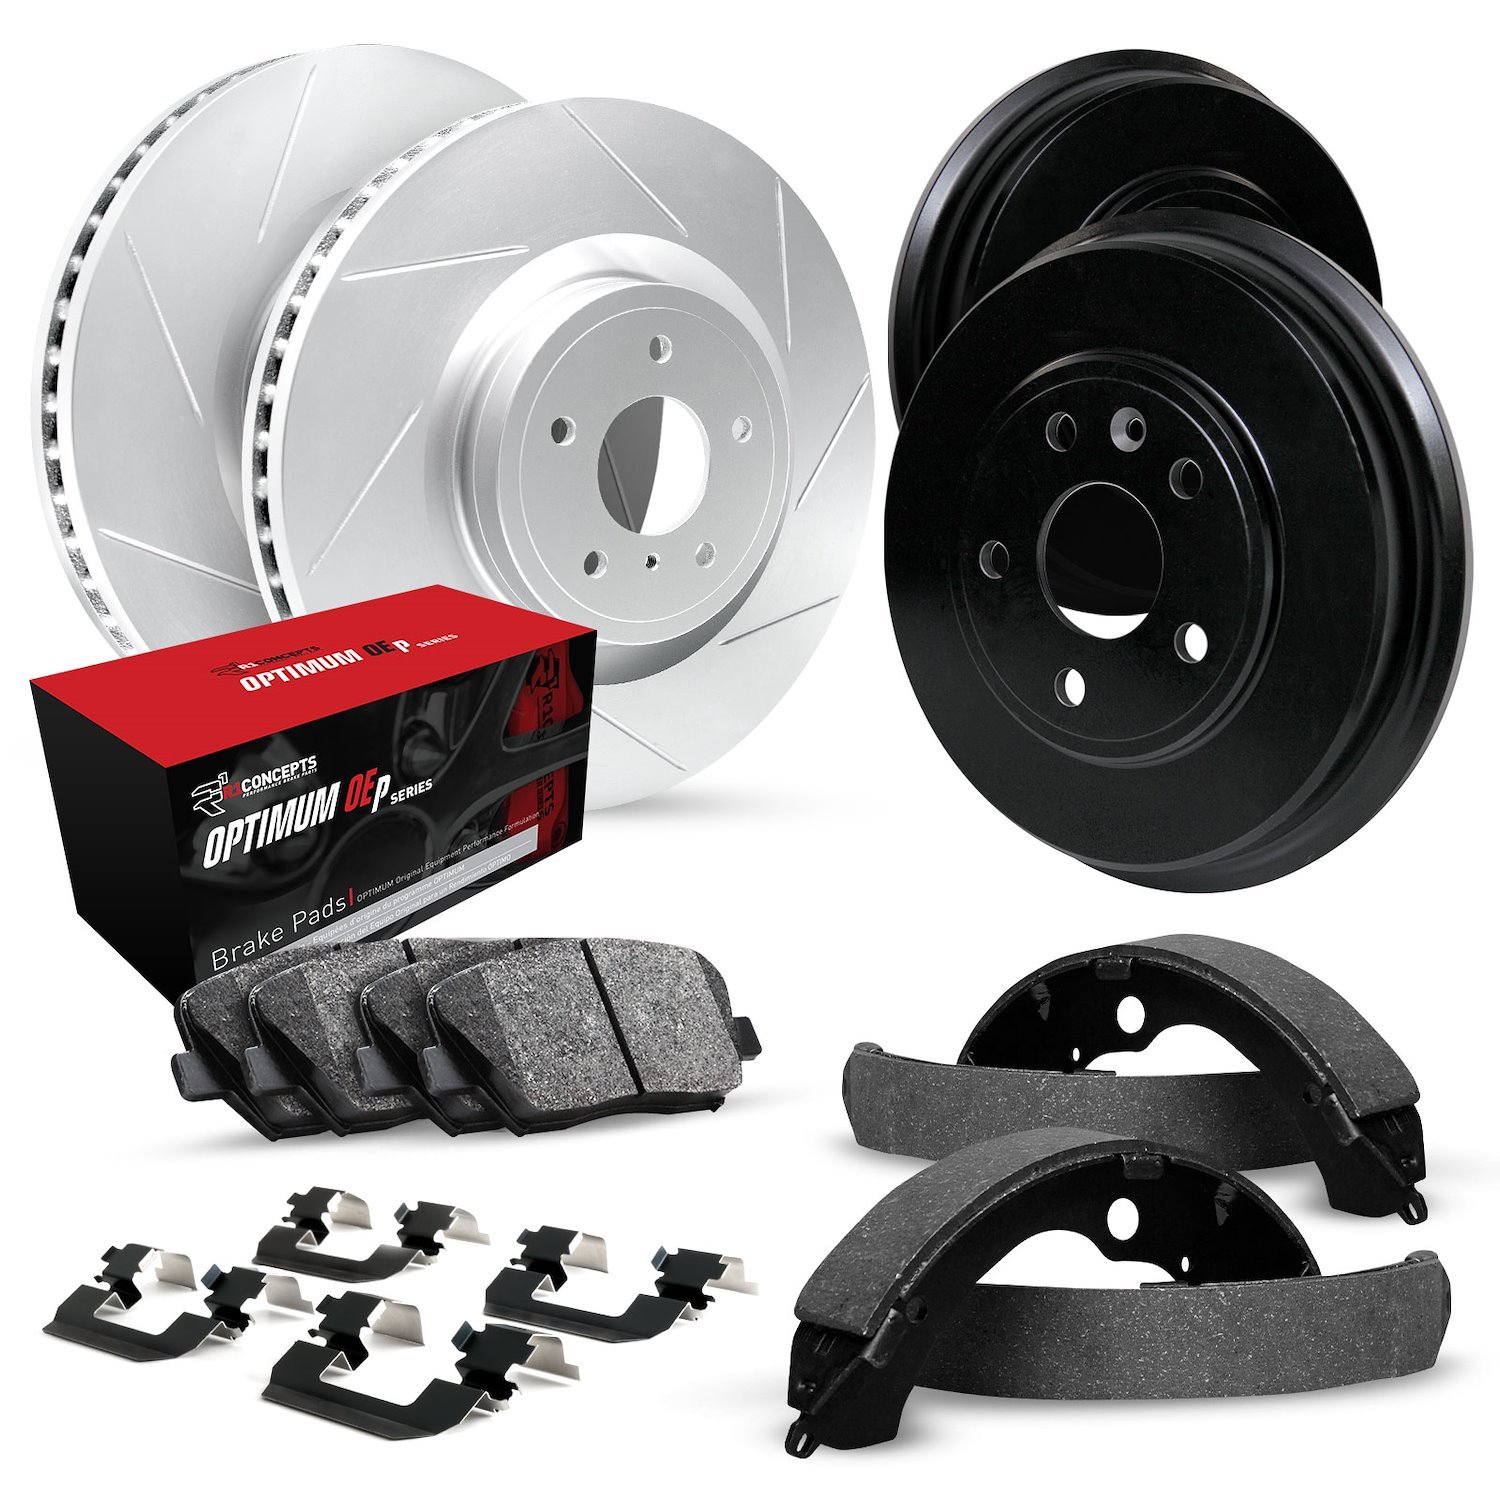 GEO-Carbon Slotted Brake Rotor & Drum Set w/Optimum OE Pads, Shoes, & Hardware, 1990-1992 Ford/Lincoln/Mercury/Mazda